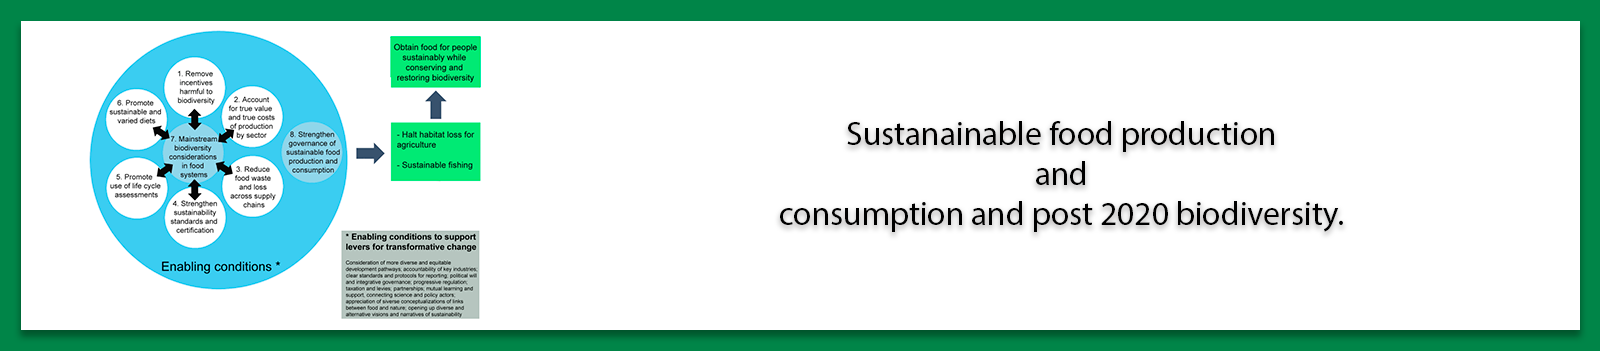 Sustanainable food production and consumption and post 2020 biodiversity.